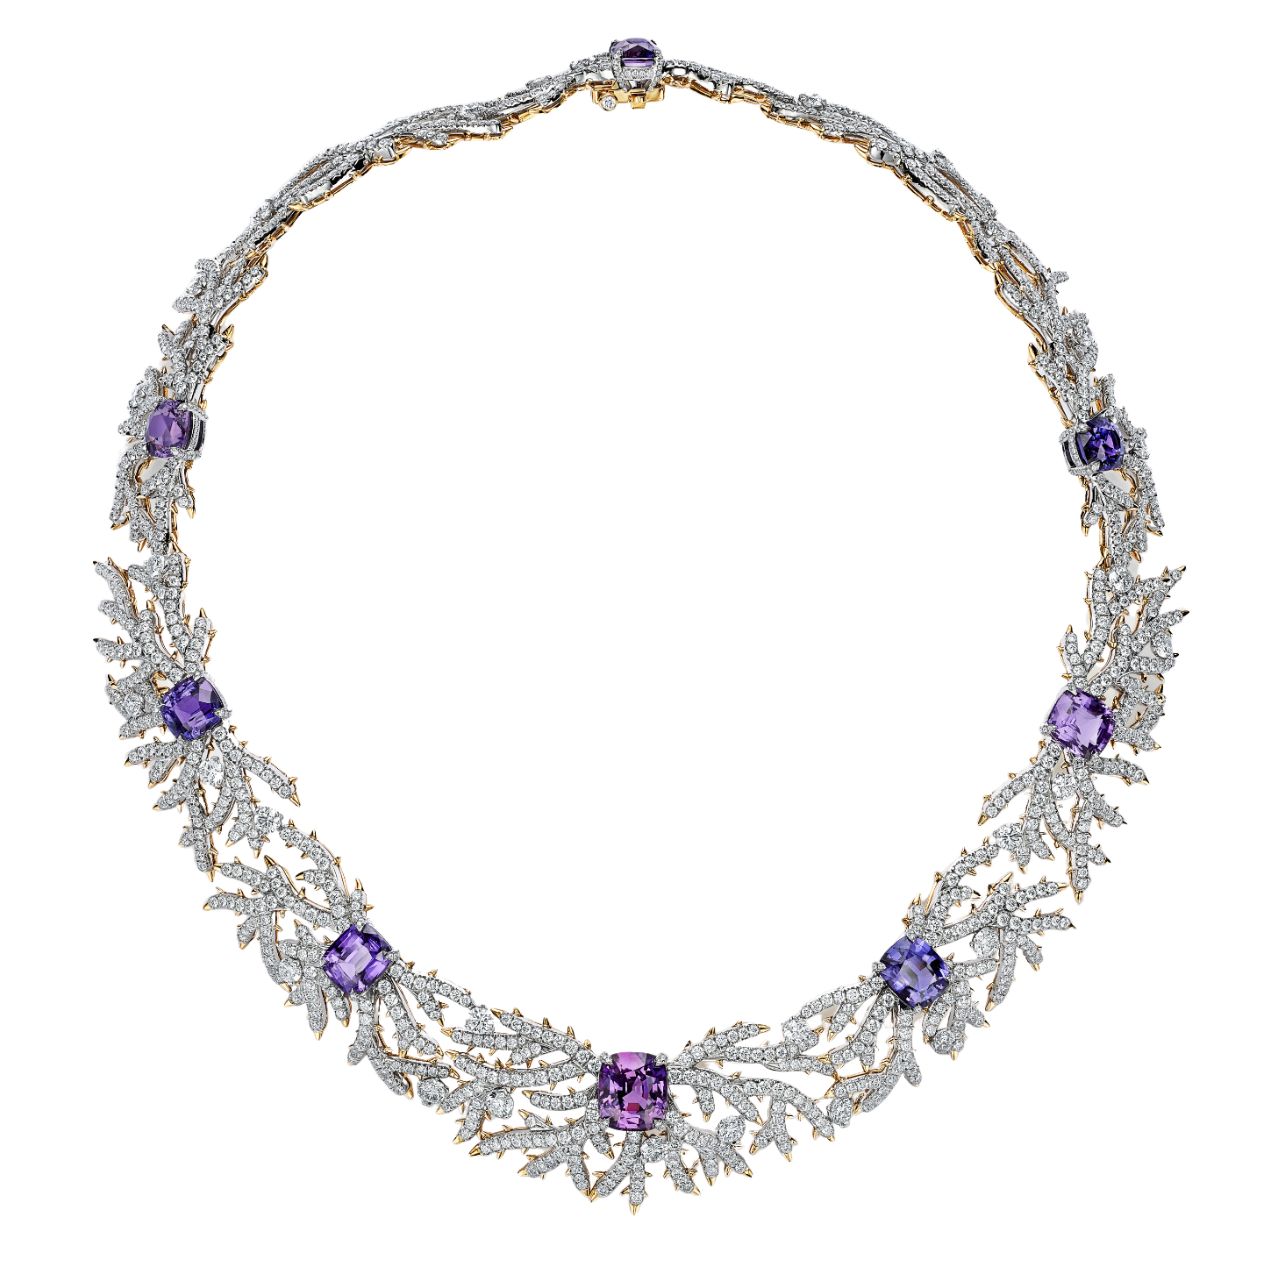 Necklace in platinum and gold featuring unenhanced purple sapphires and diamonds from the 2023 Blue Book Collection.